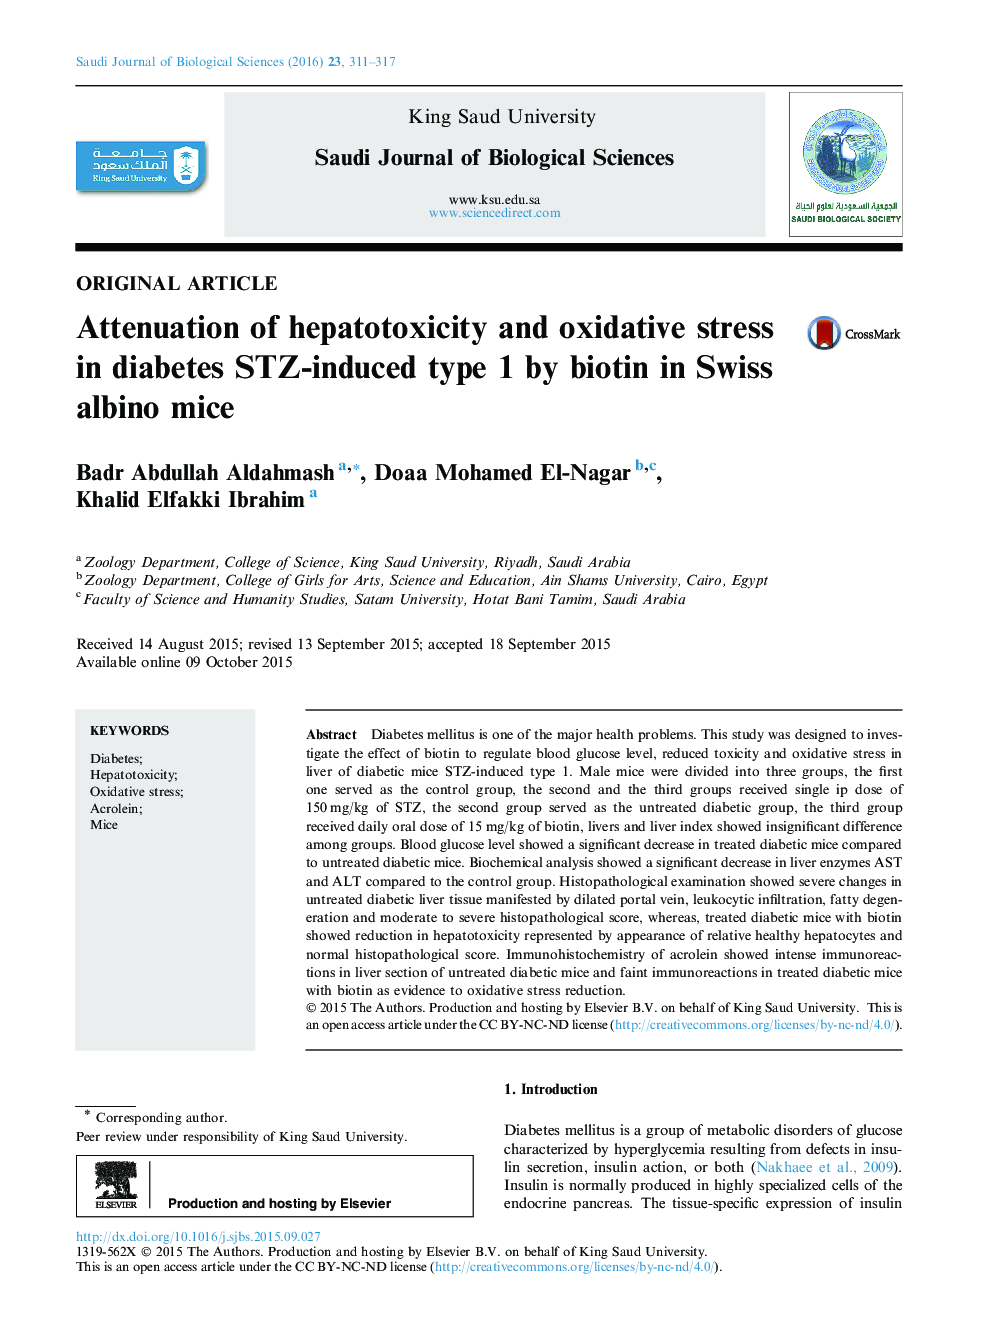 Attenuation of hepatotoxicity and oxidative stress in diabetes STZ-induced type 1 by biotin in Swiss albino mice 